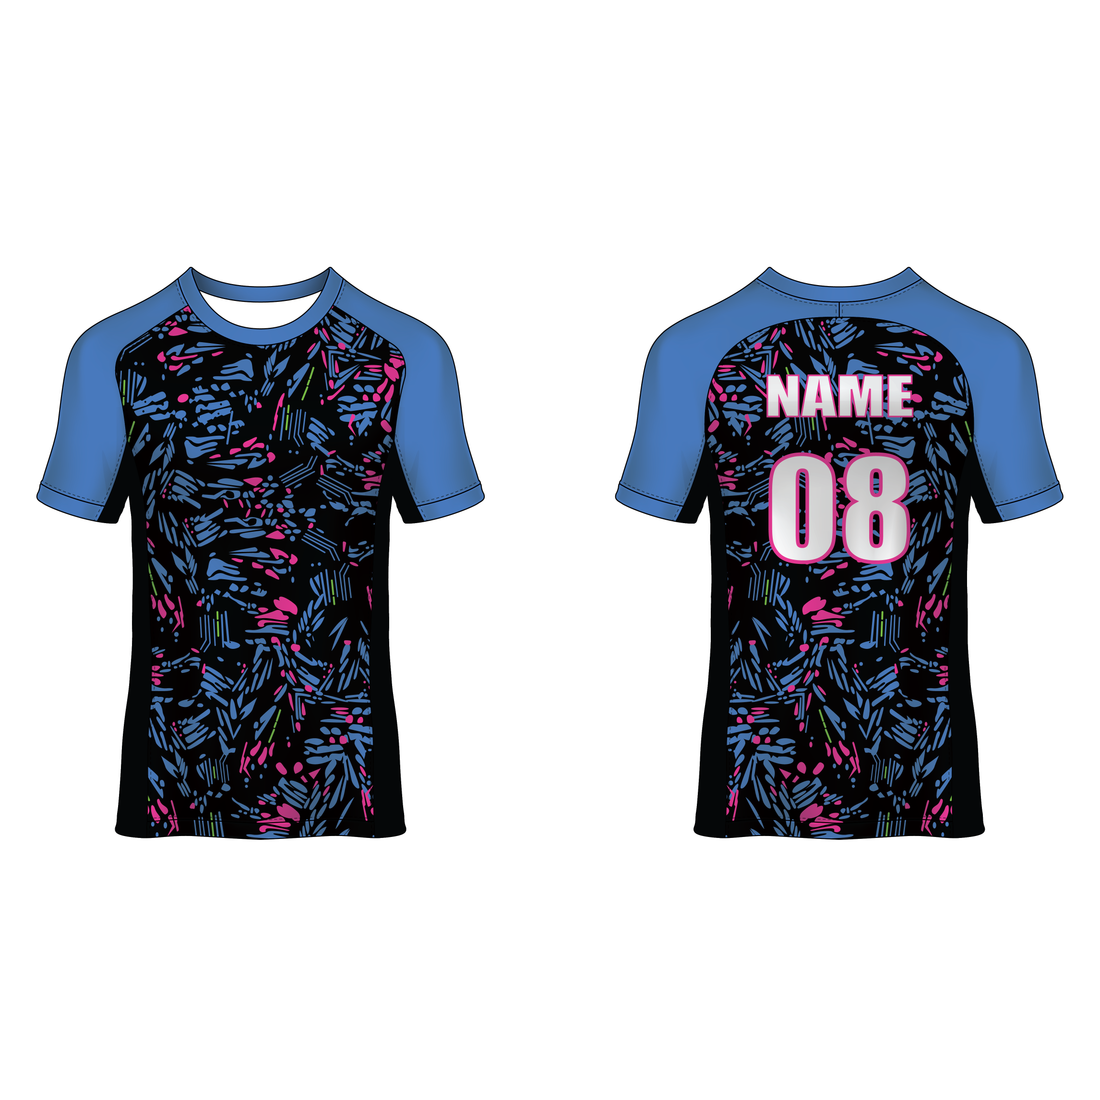 NEXT PRINT All Over Printed Customized Sublimation T-Shirt Unisex Sports Jersey Player Name & Number, Team Name NP50000268